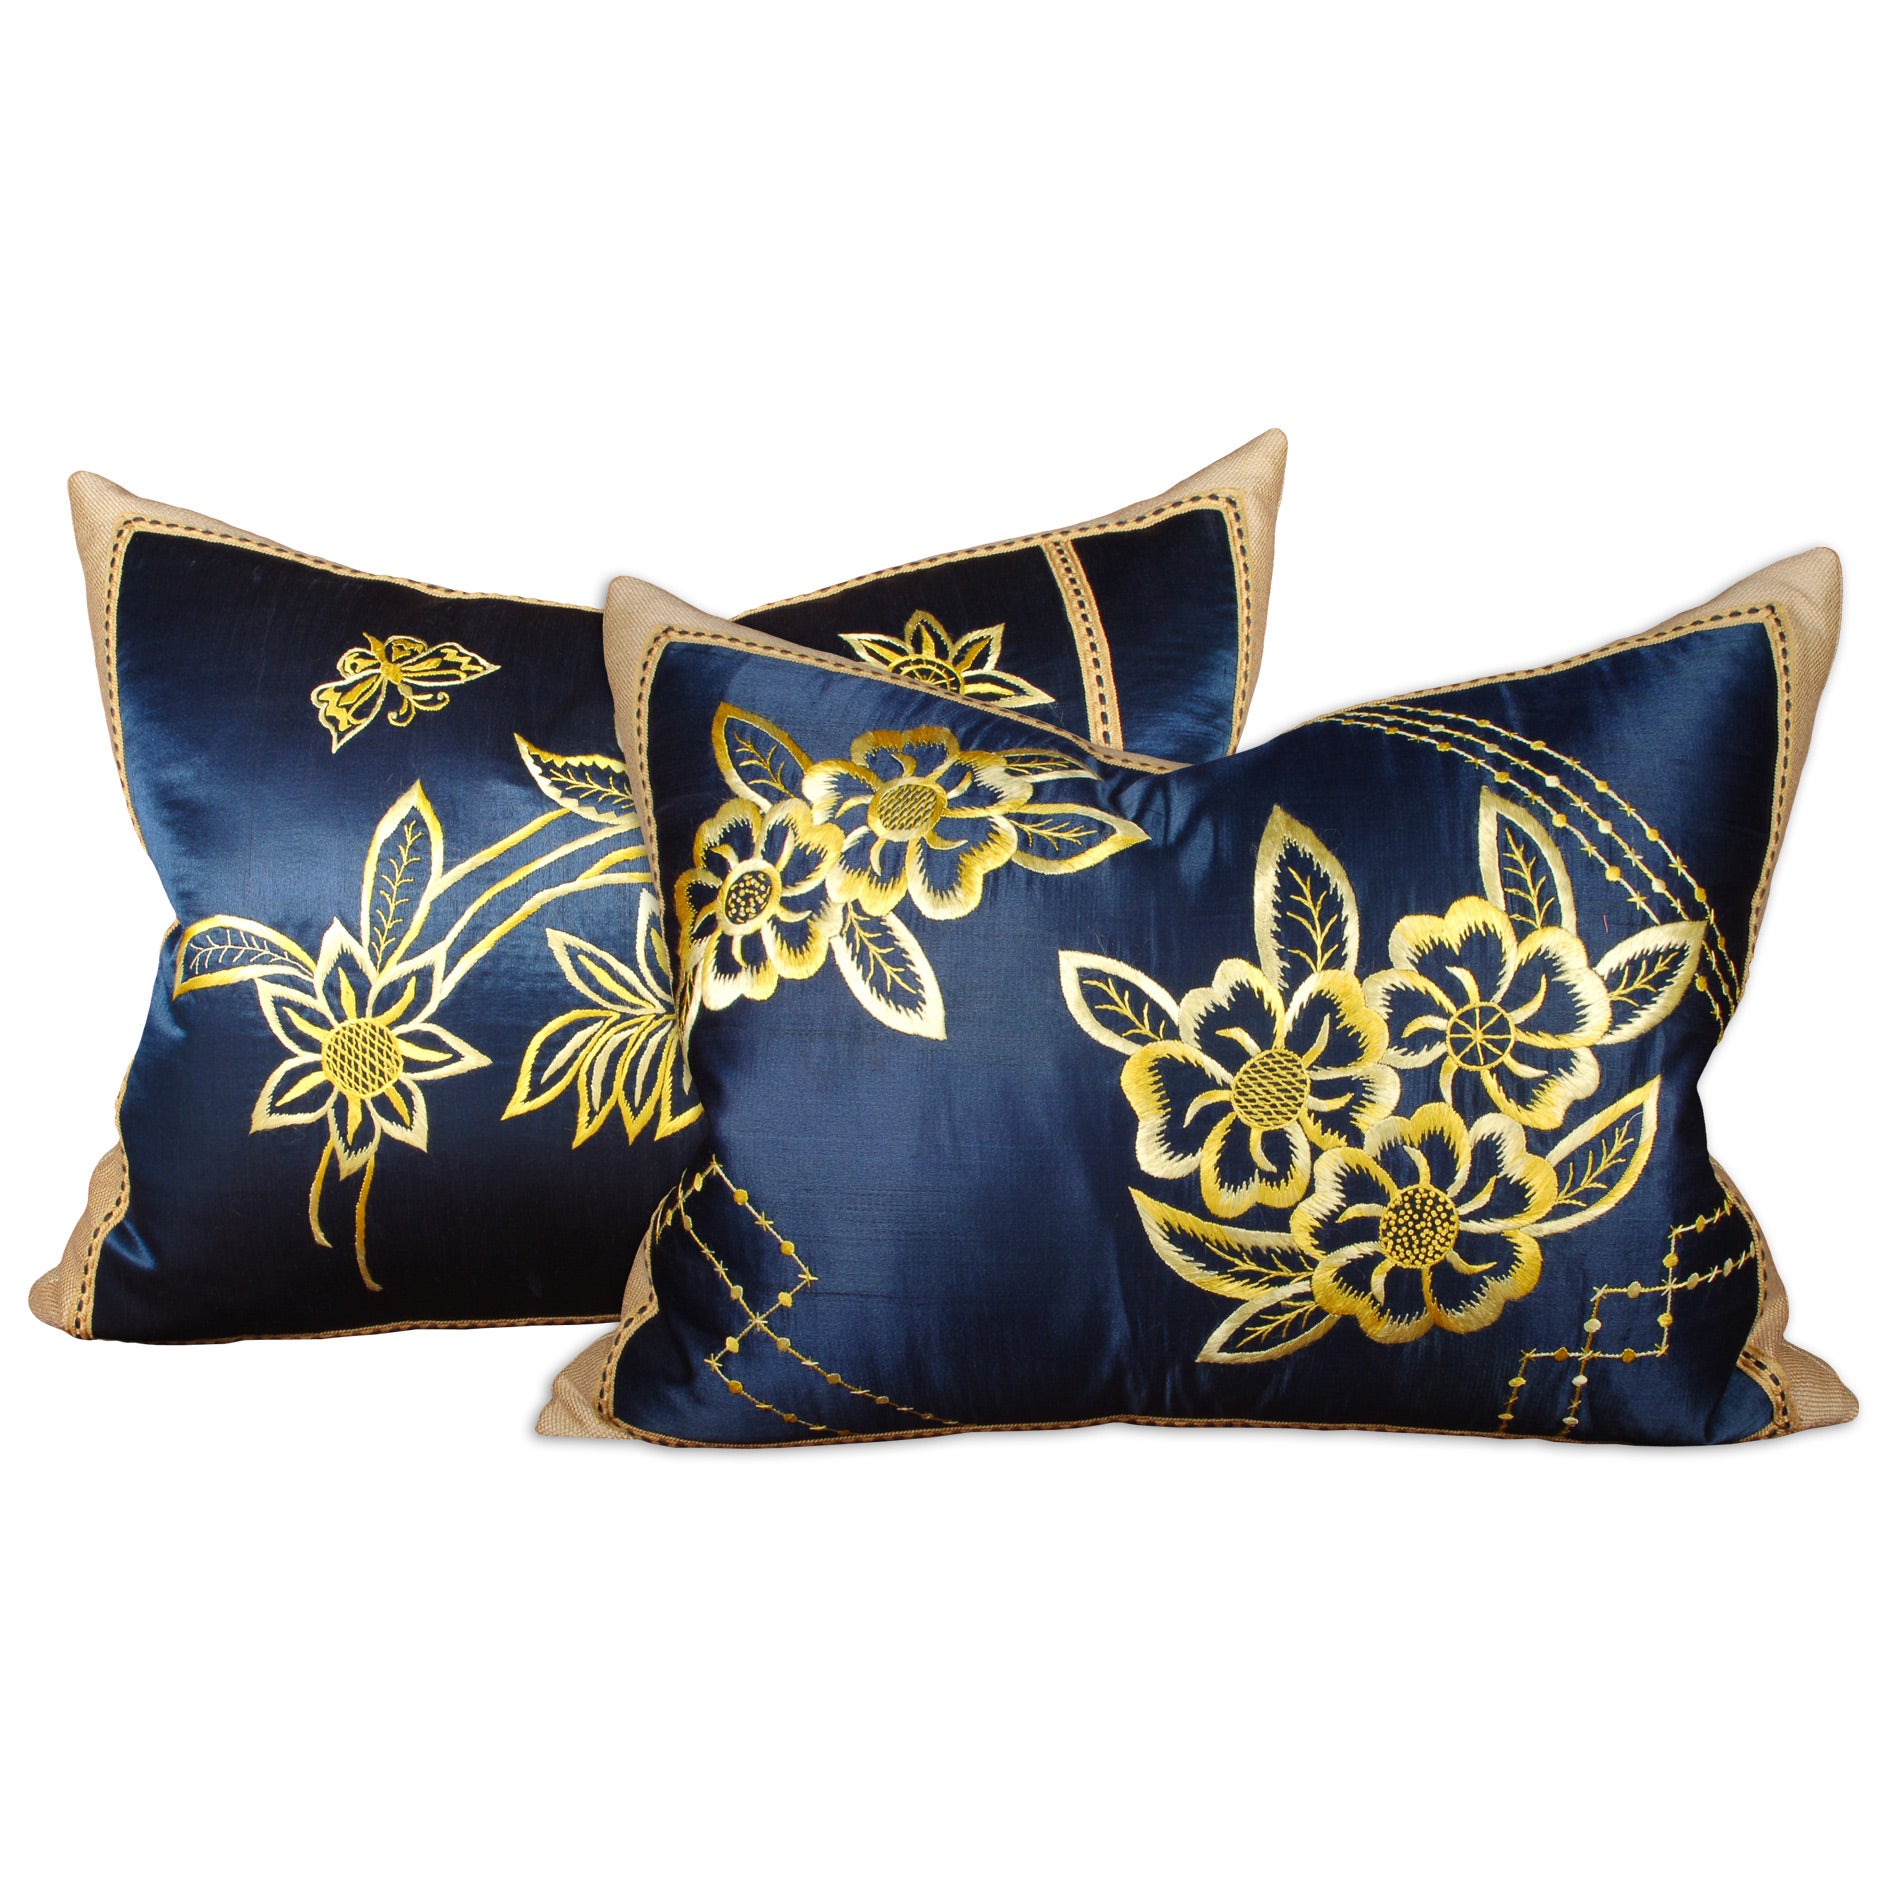 Pair of 19th Century Russian Silk Embroidered Pillows